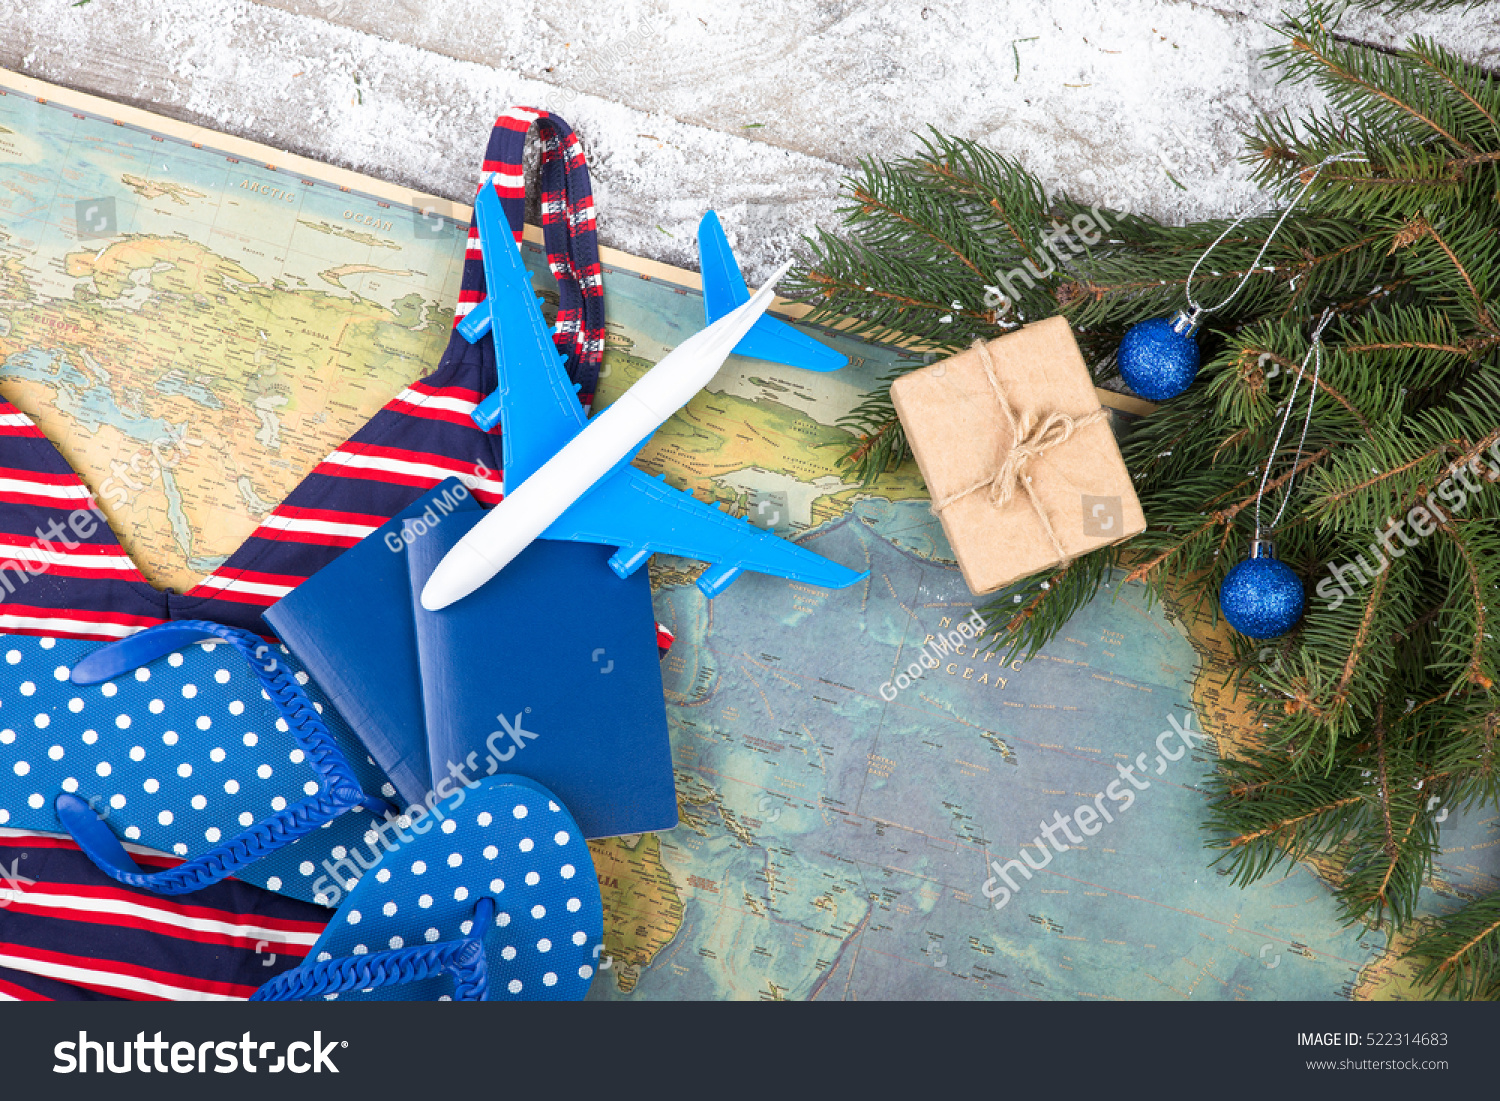 Christmas concept - travel. Fir branches with snow, maps, swimsuit, passports, gift box, flops and toy airplane #522314683